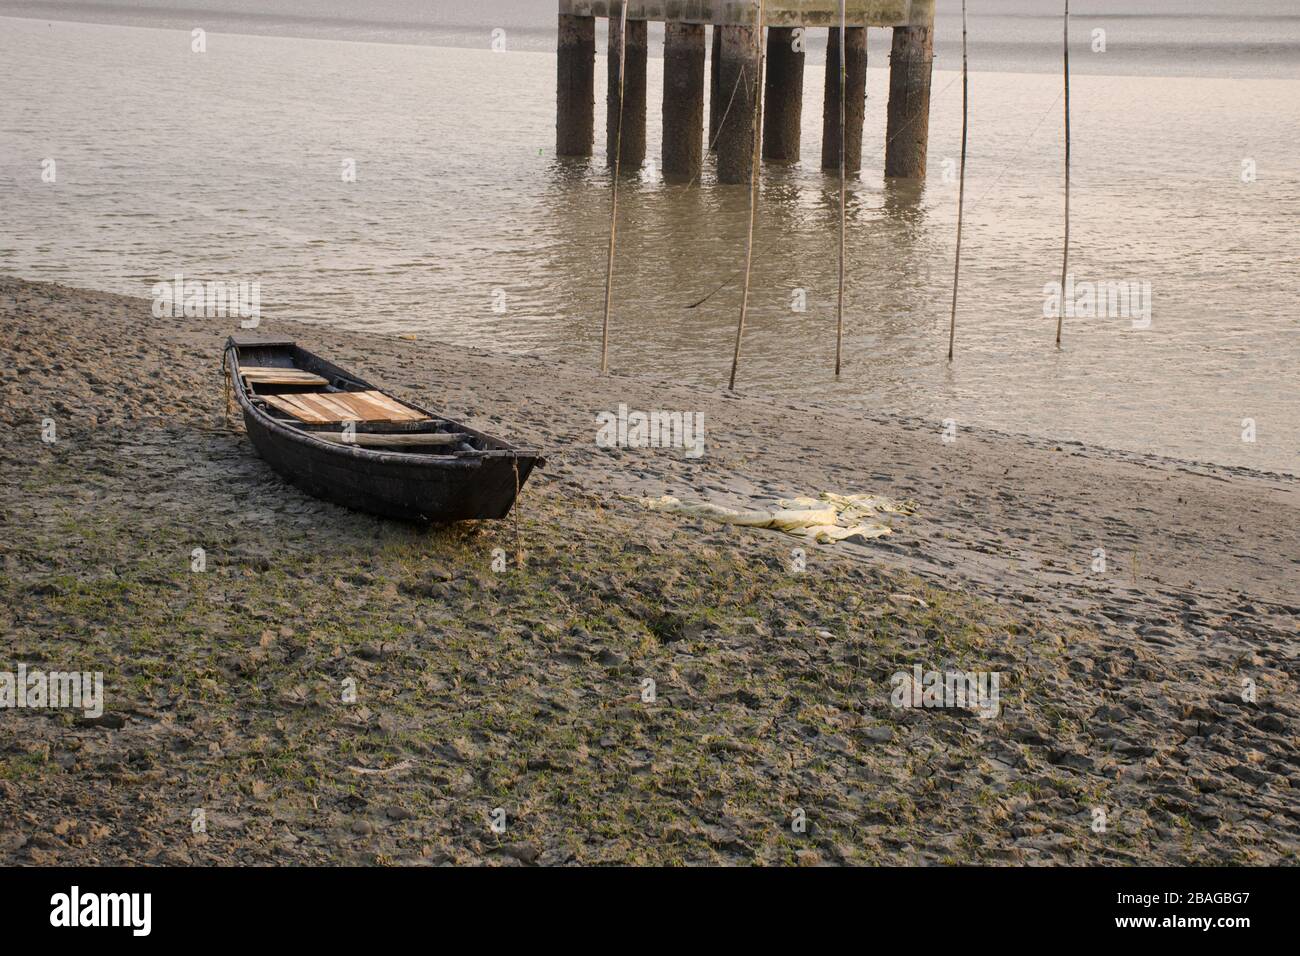 lonely boat at matla river canning west bengal Stock Photo